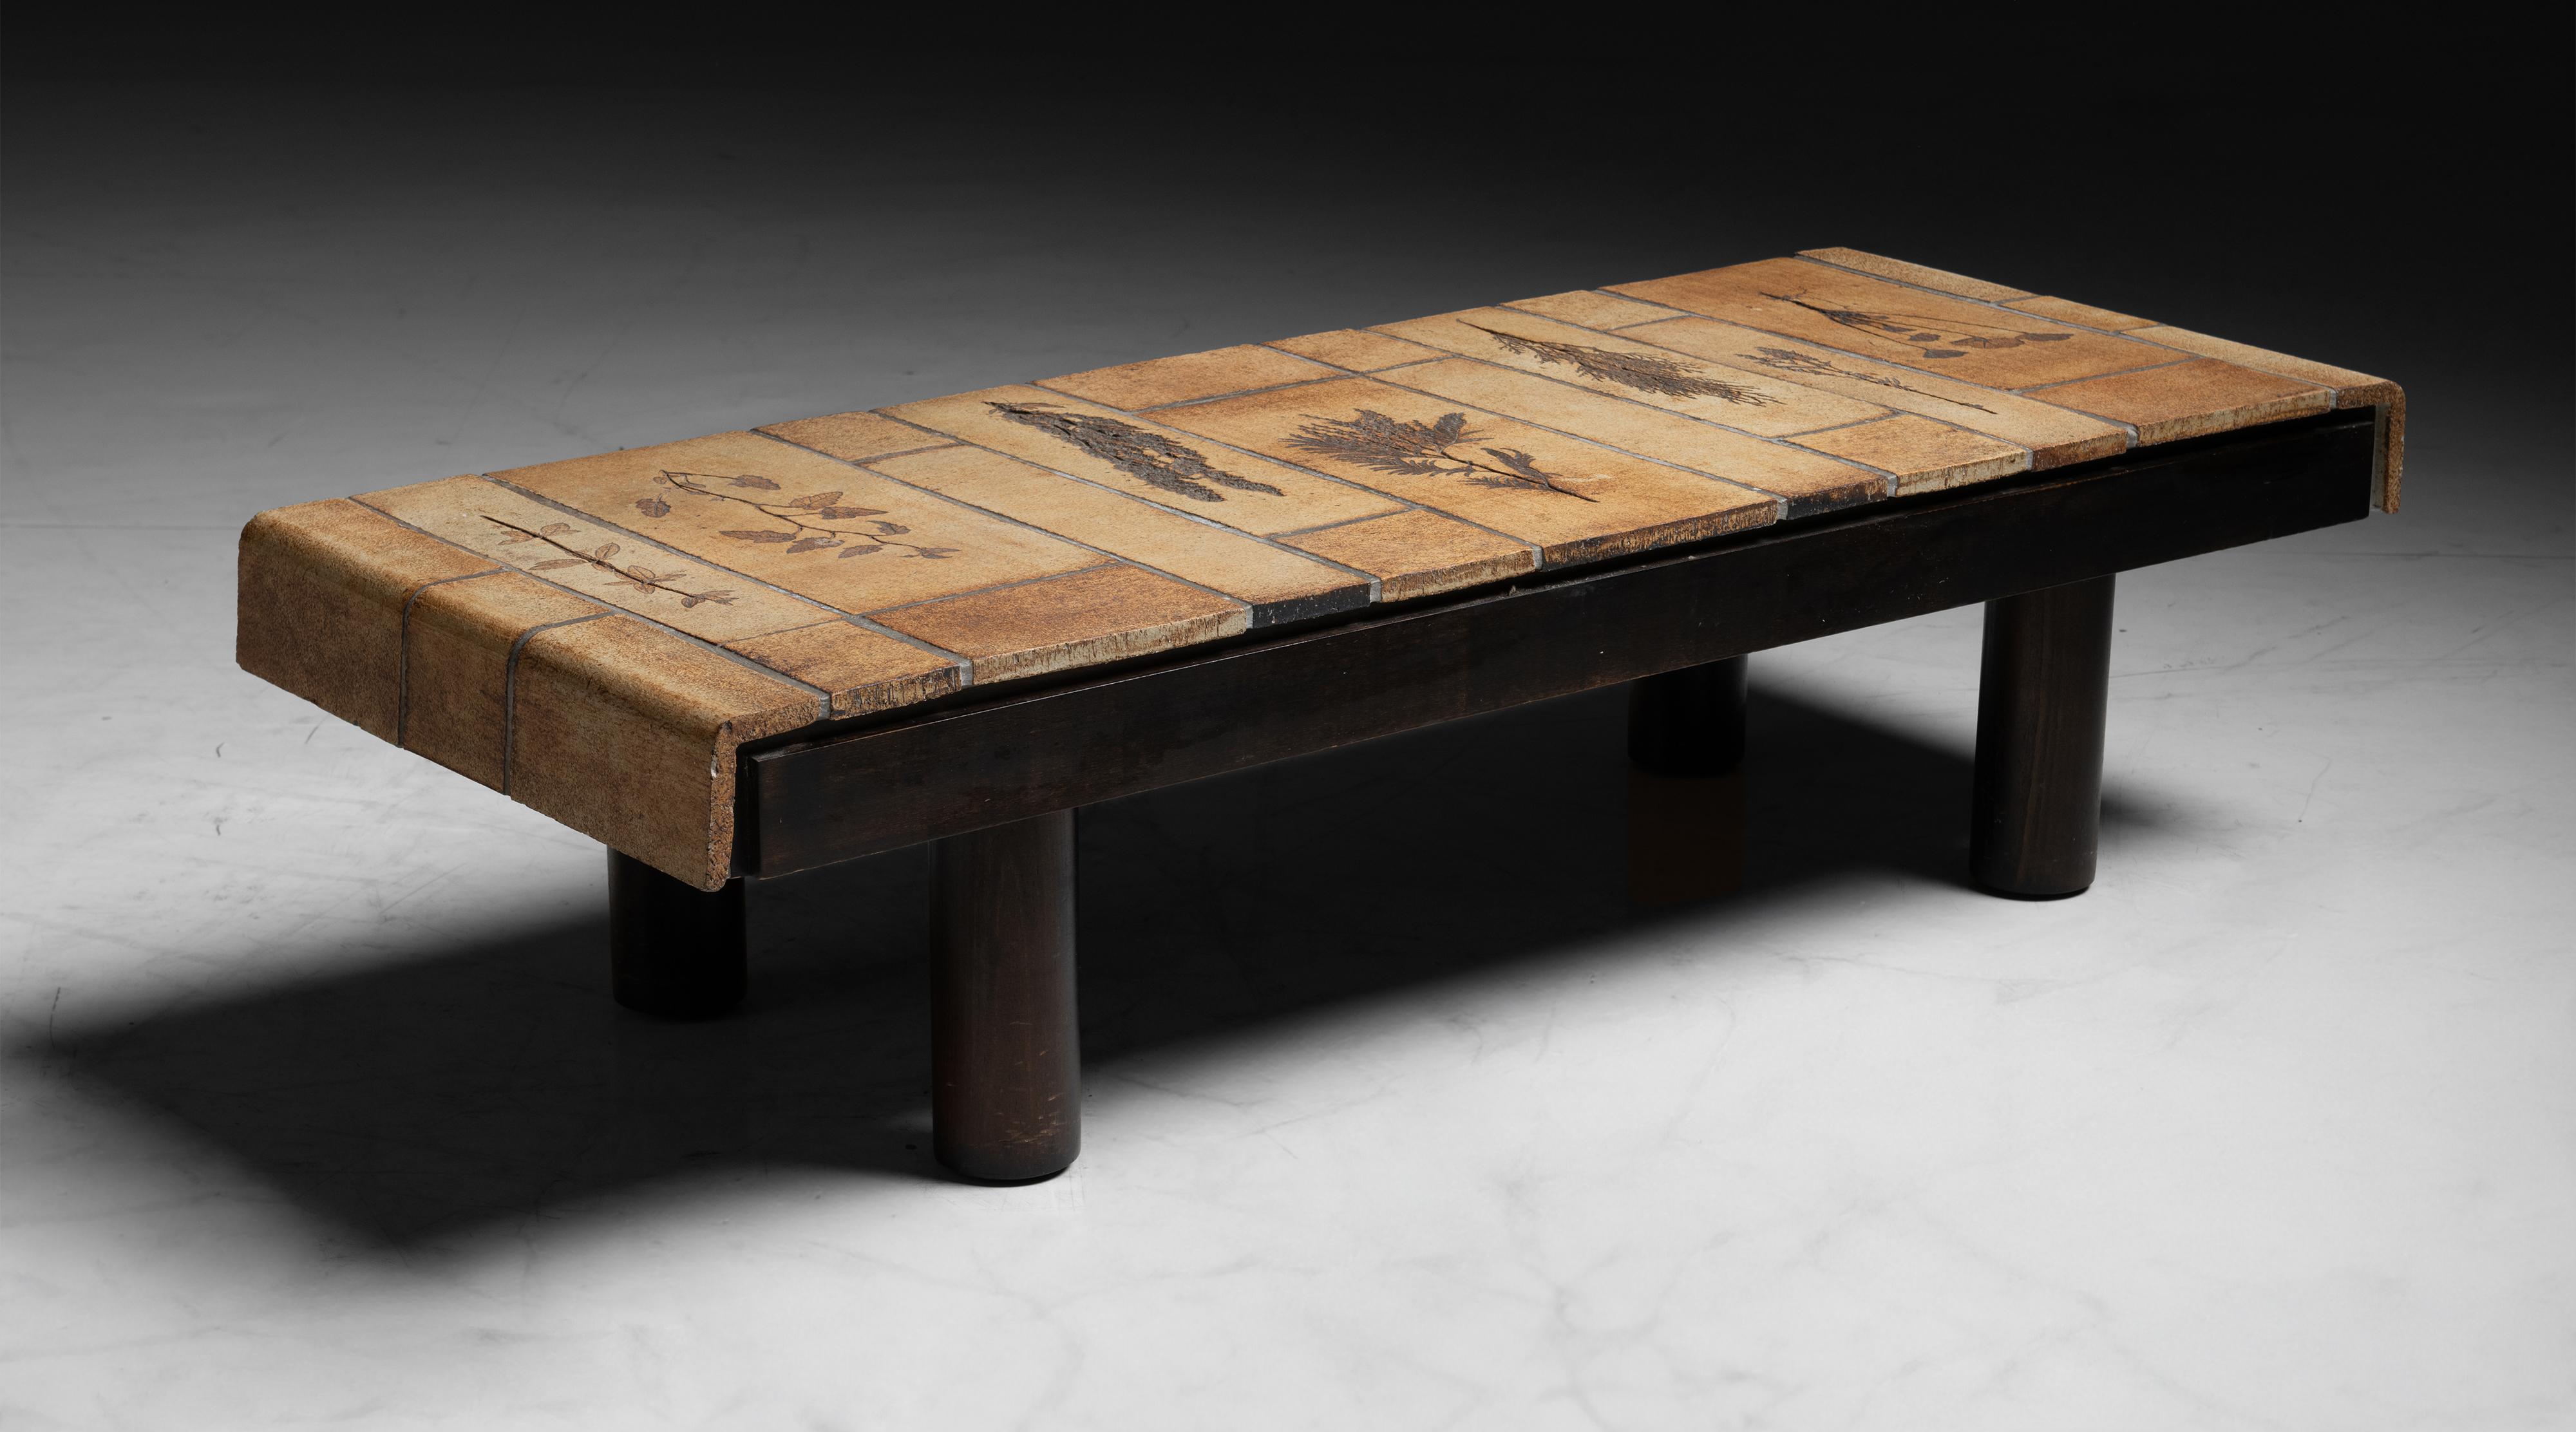 Roger Capron Coffee Table
France circa 1975
Wooden frame and tiled tabletop, with stamped leaf motifs.
46”L x 18”d x 11.5”h